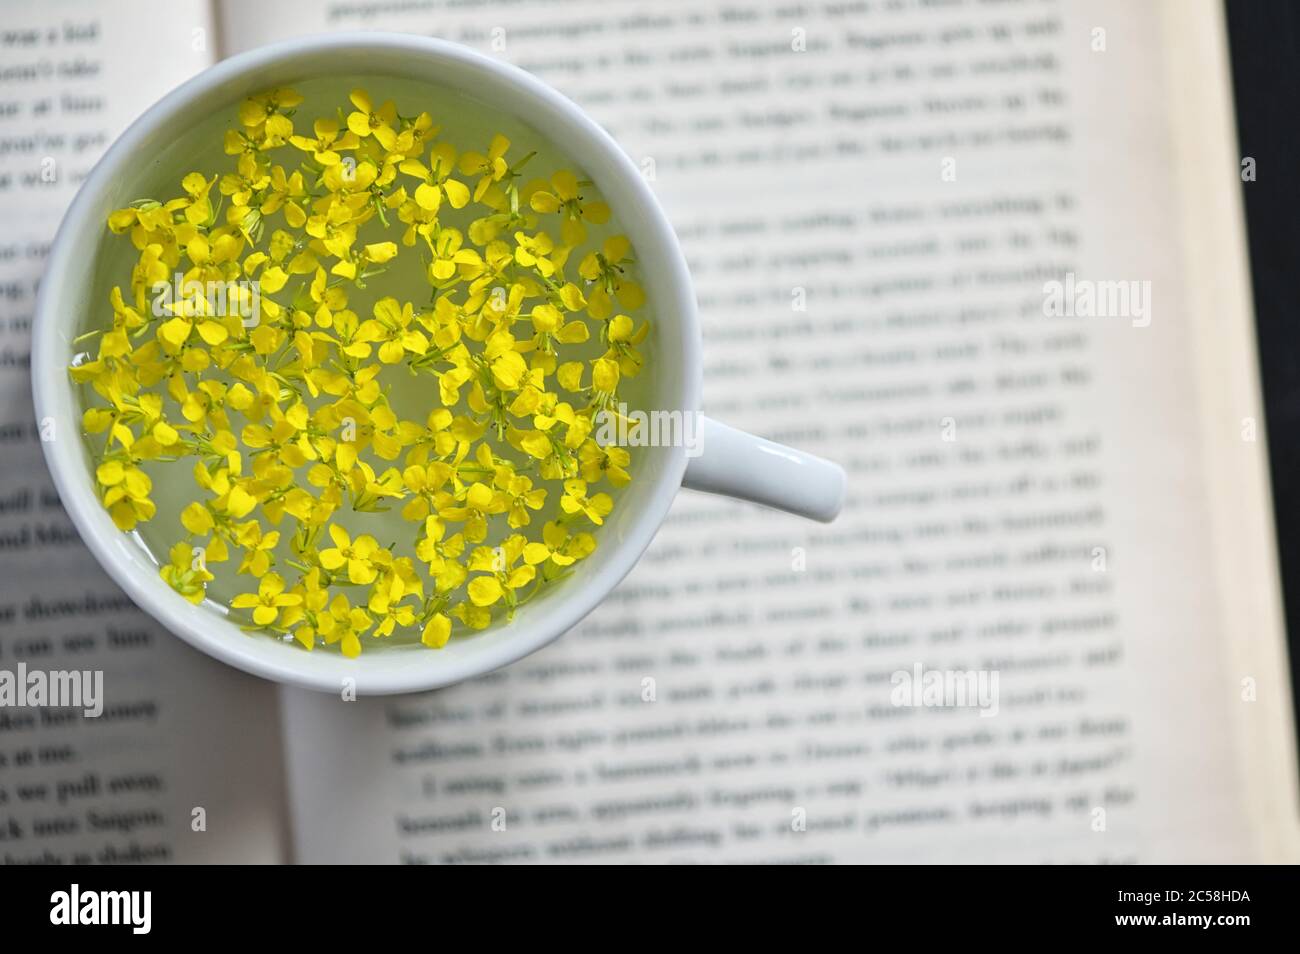 Closeup Cup Of Herbal Drink on Open Book Stock Photo